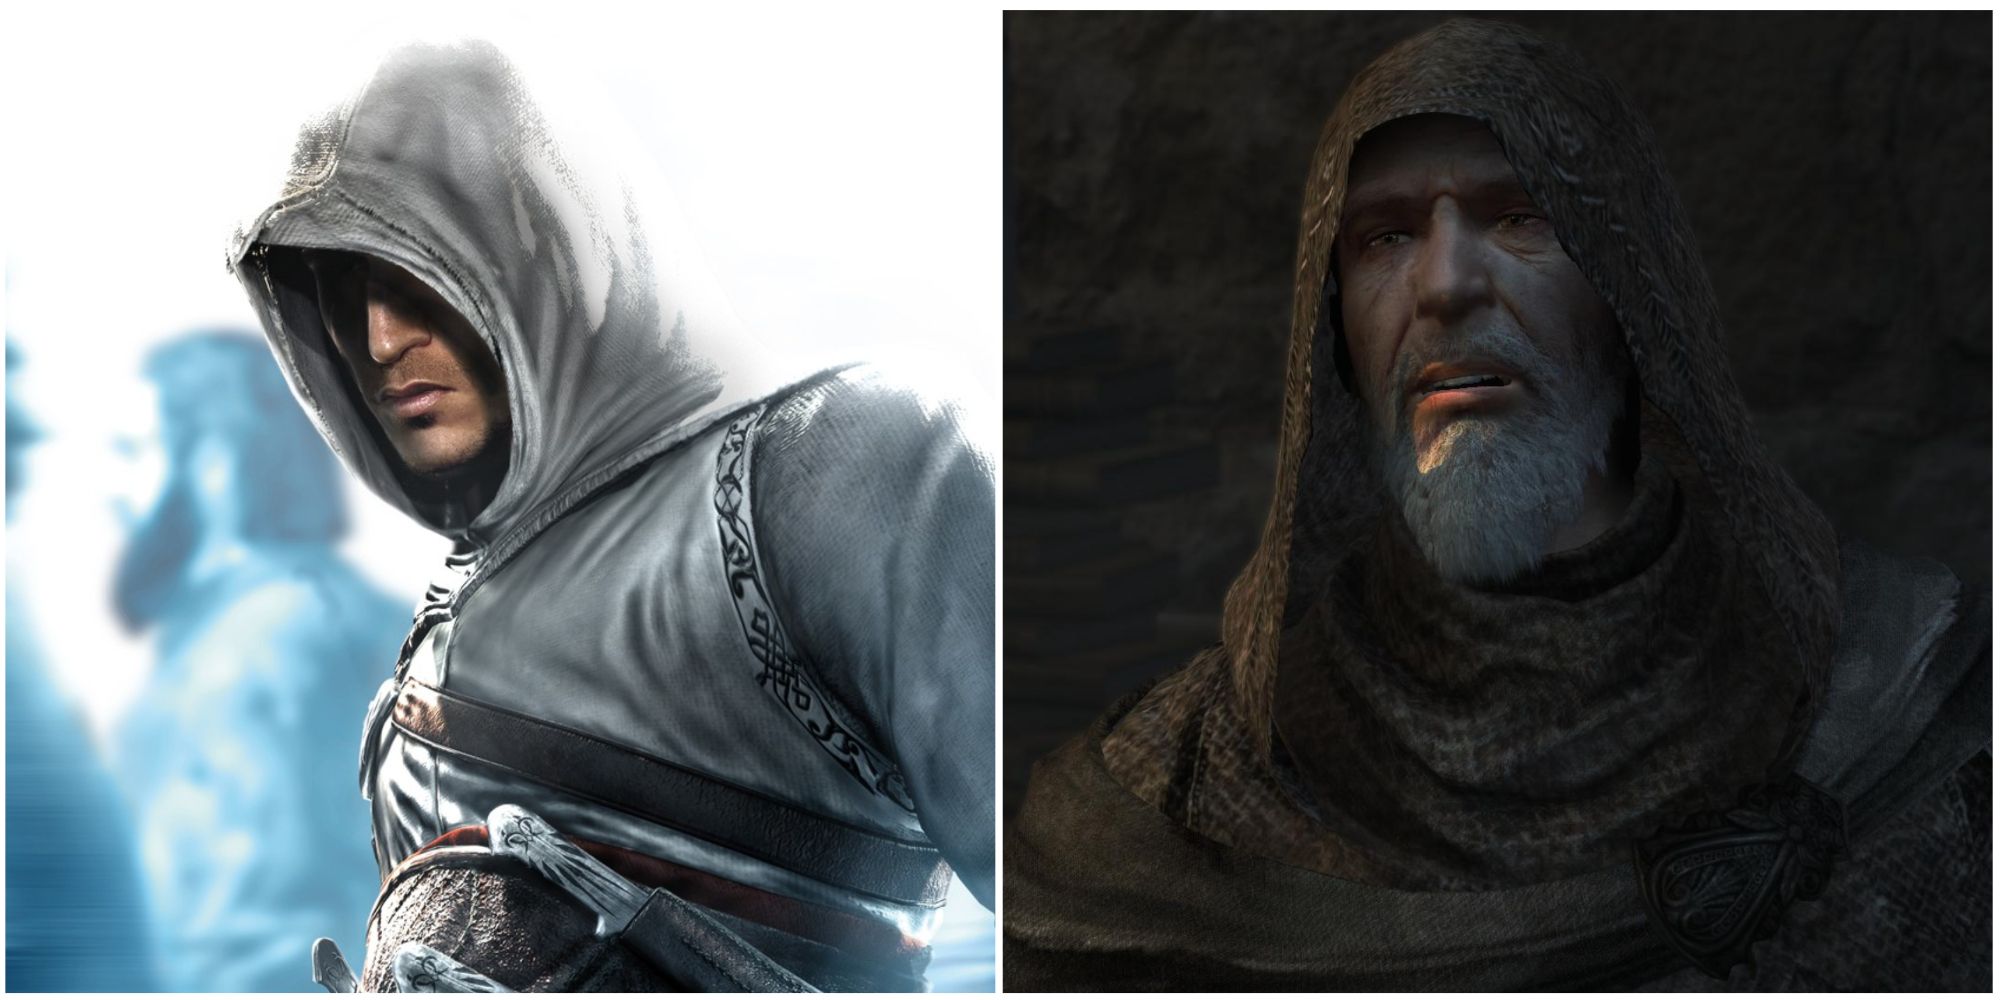 Altair in Assassin's Creed and Revelations